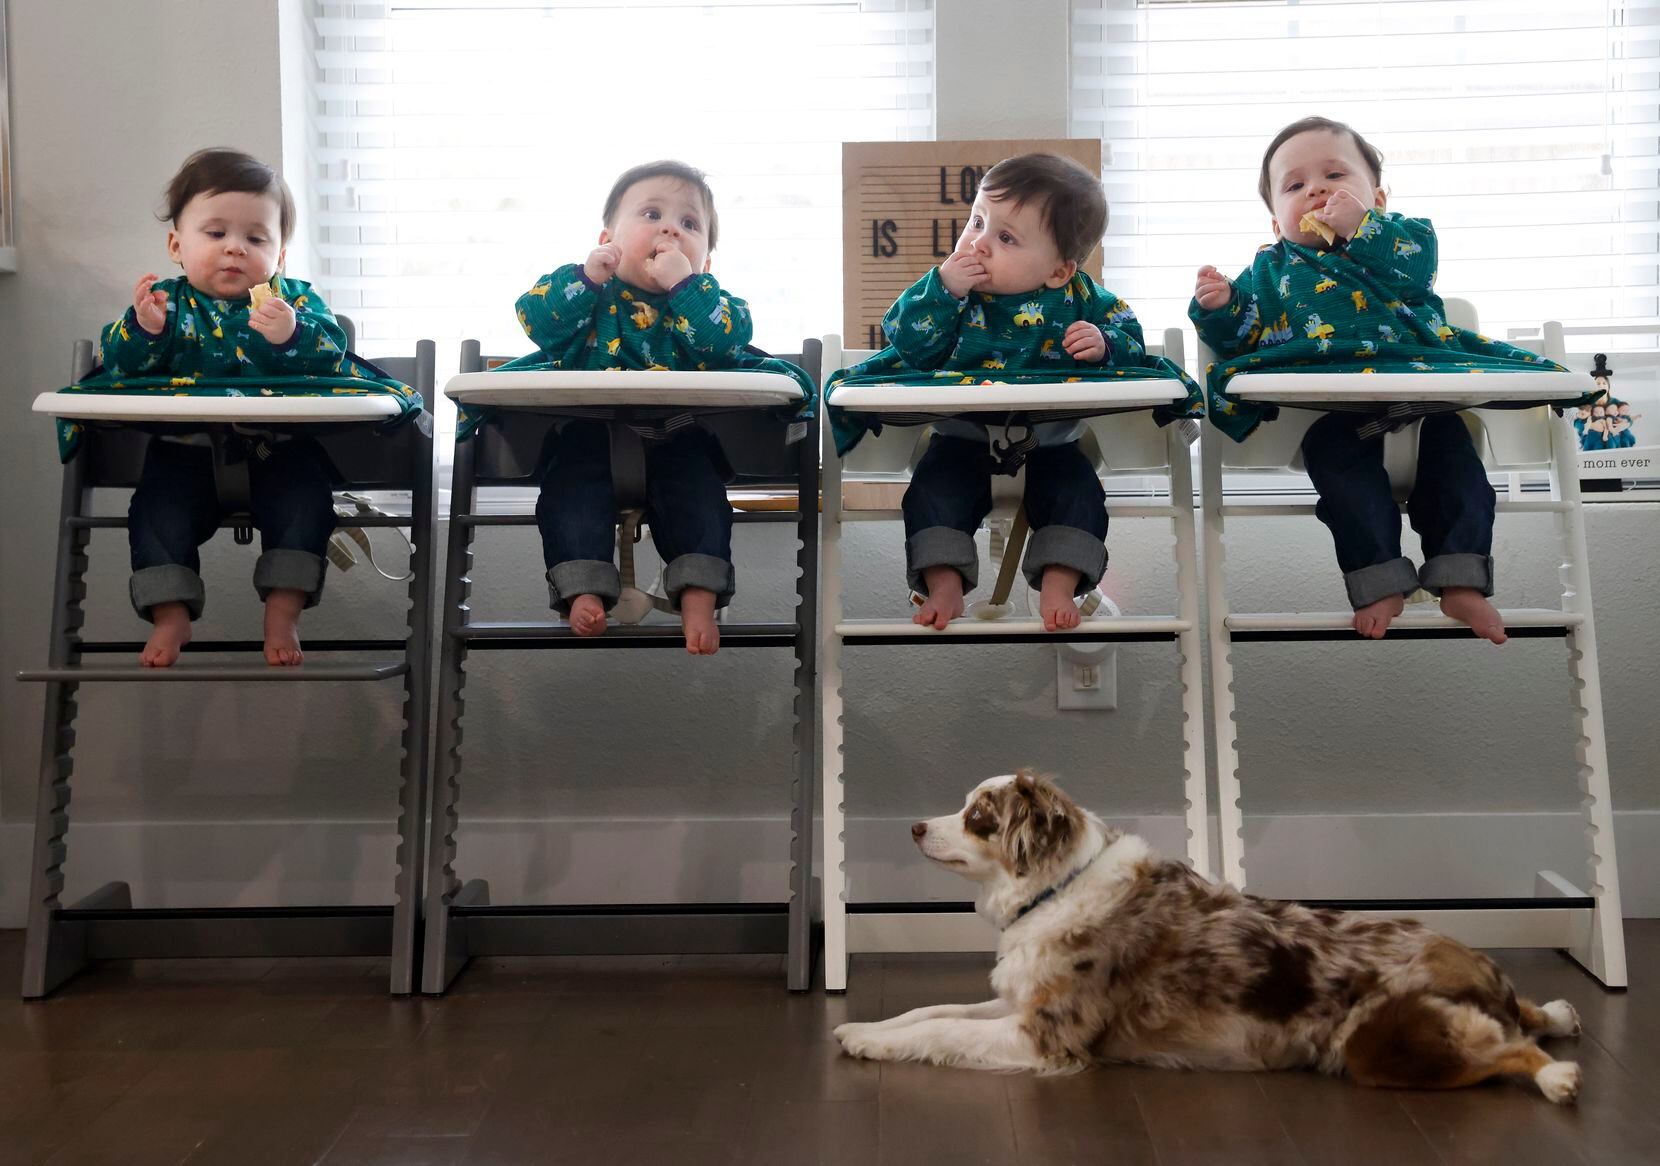 Harrison, Hardy, Henry and Hudson Marr had lunch in February as the family dog, Zeke, awaited “treats” to rain down from above.